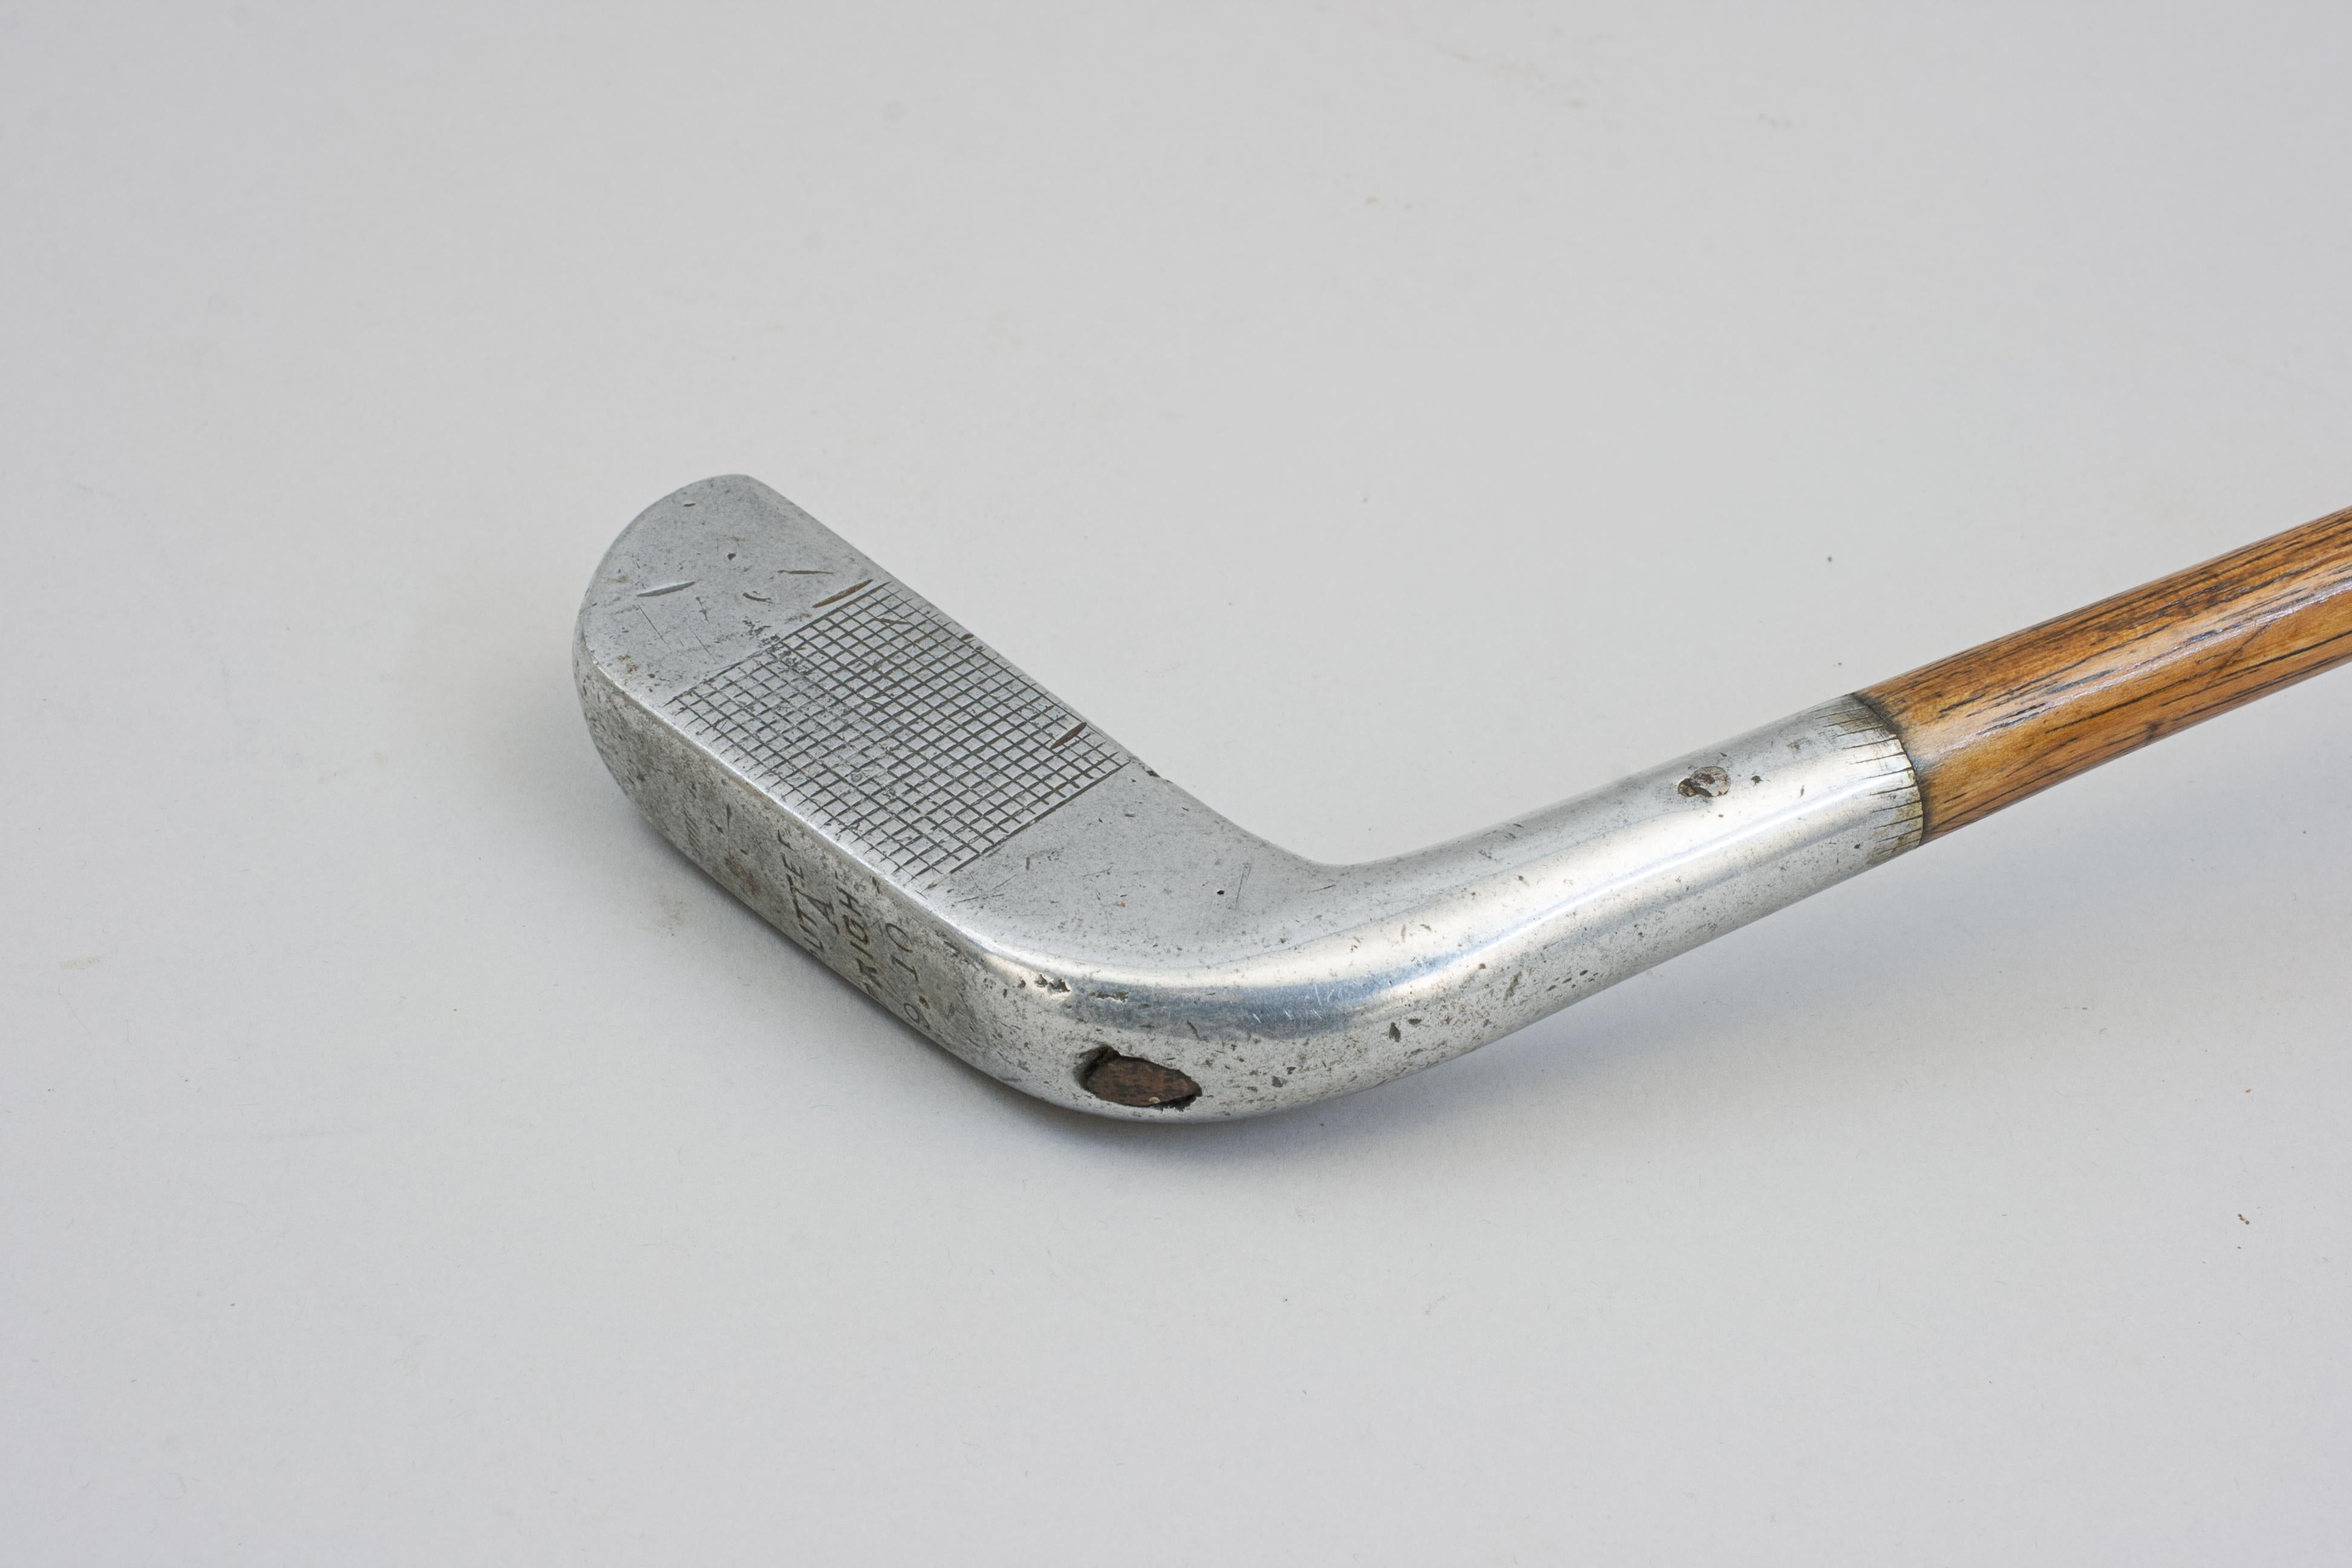 English Vintage Golf Club, Hickory Shafted Aluminium Putter